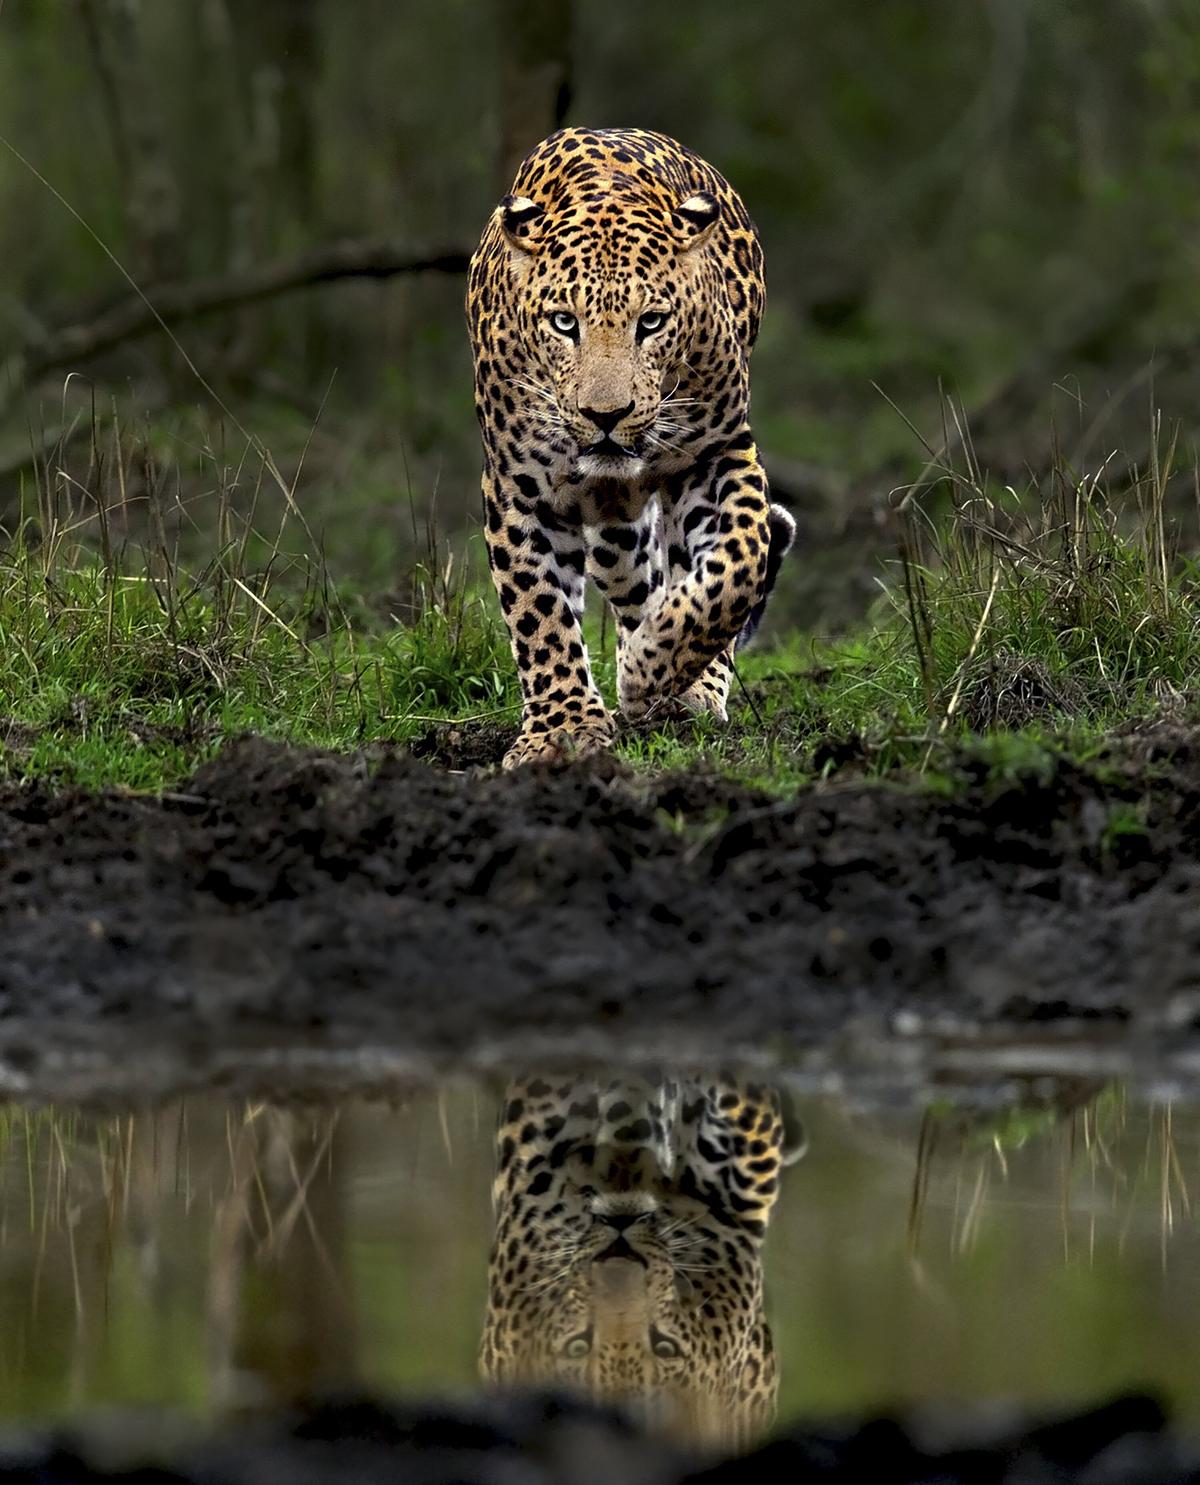 Cleopatra pictured approaching a watering hole (Courtesy of <a href="https://www.instagram.com/mithunhphotography/">Mithun H.</a>)